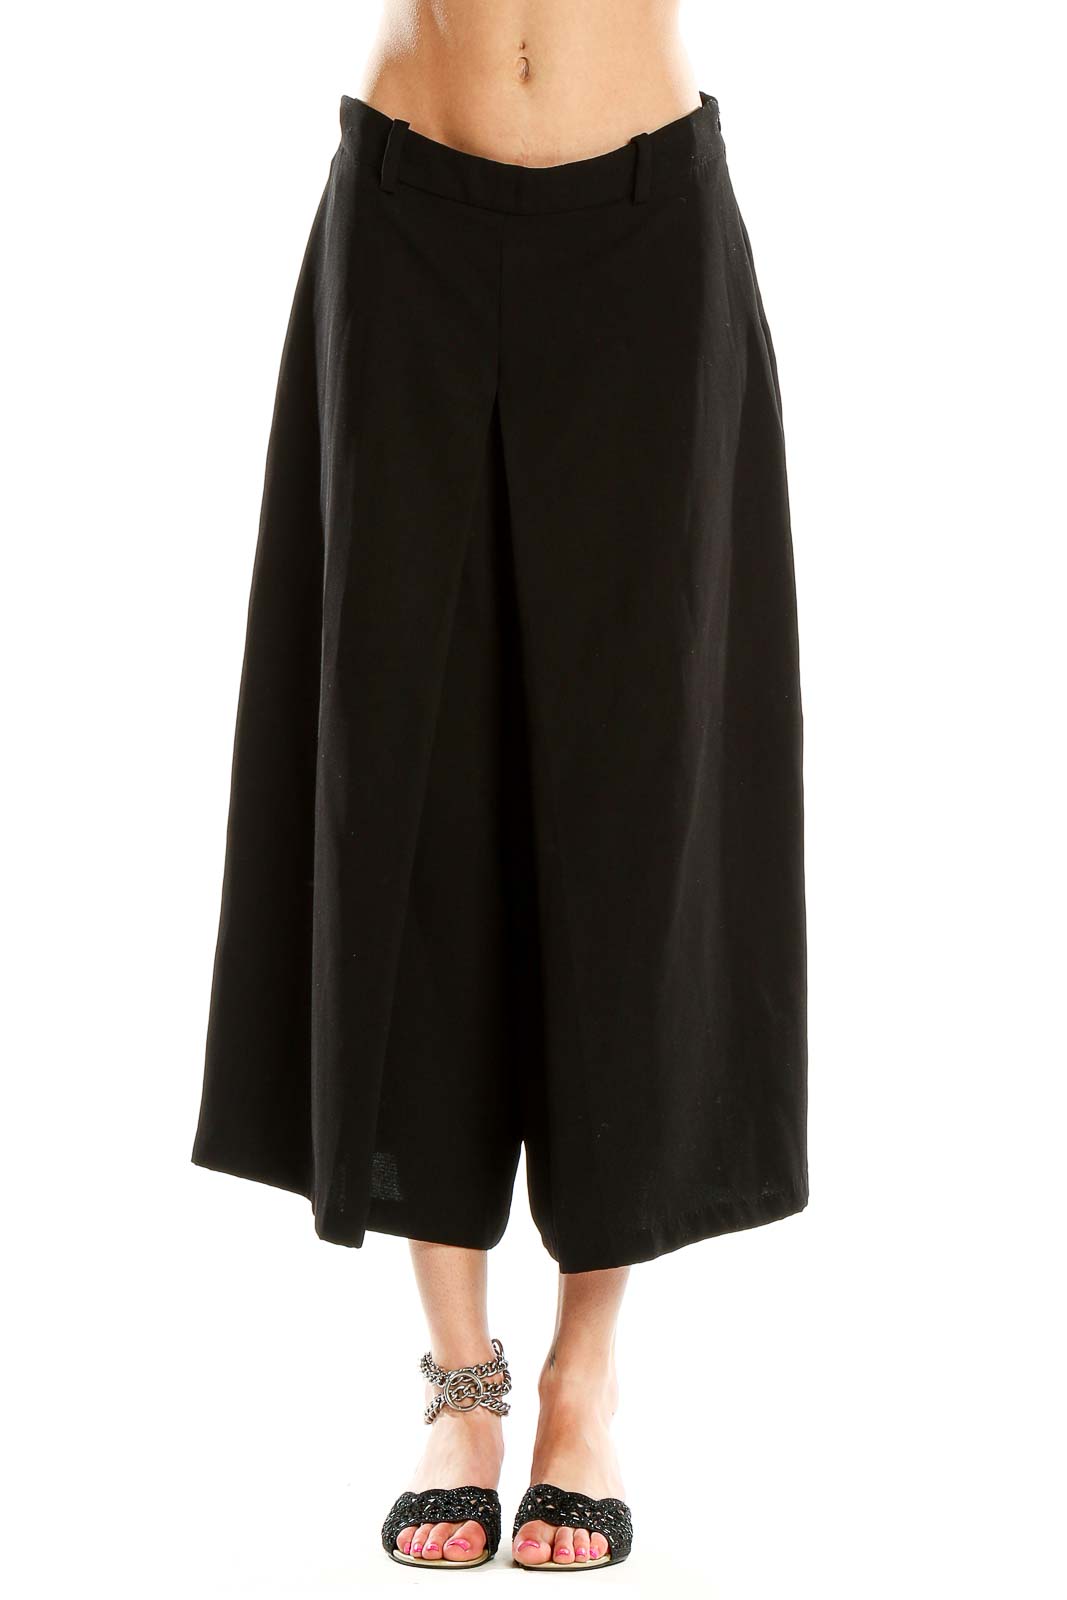 Black Solid Casual Culottes Pants Front